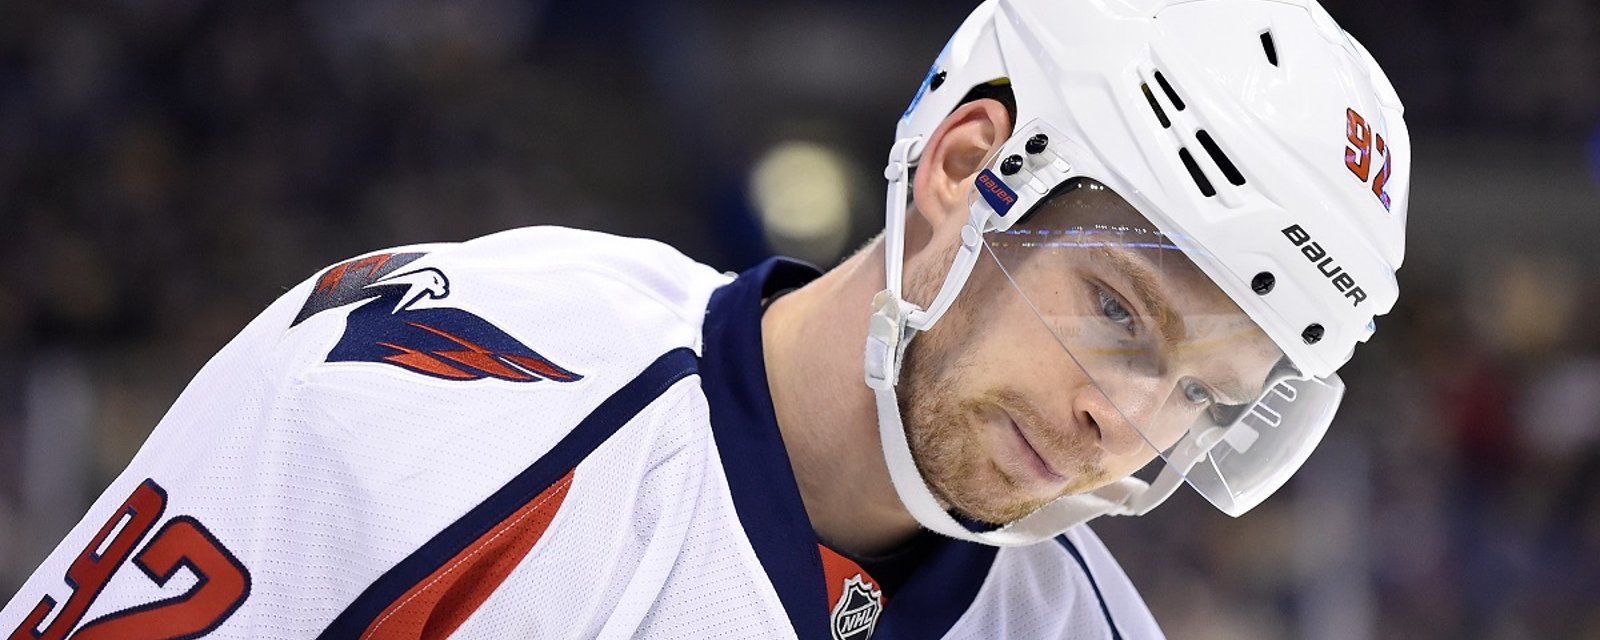 Washington Capitals forward busted for diving by the NHL.